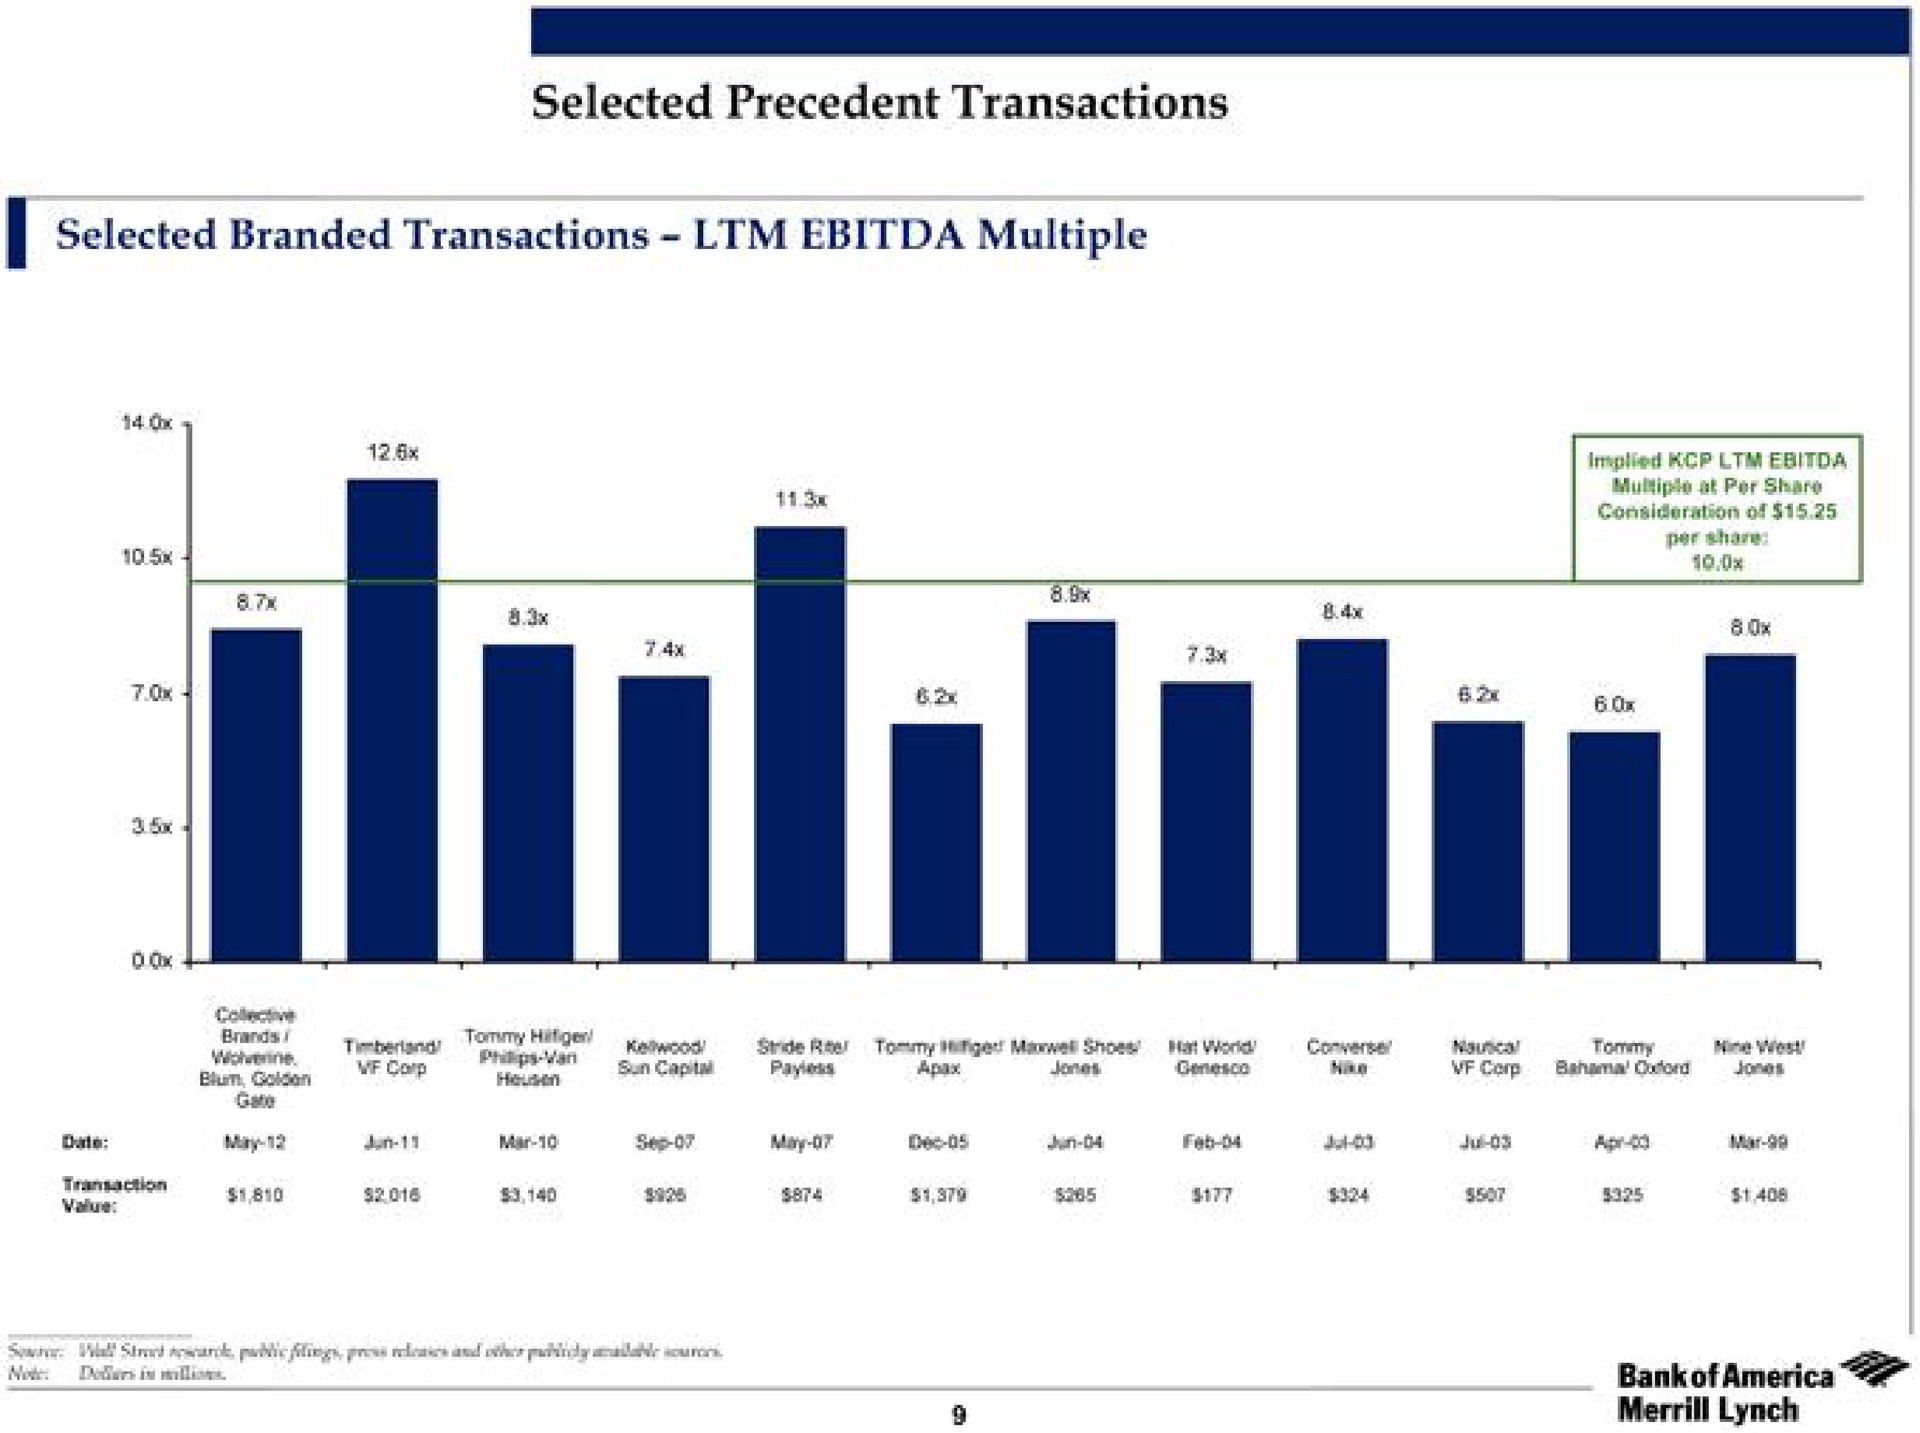 selected branded transactions multiple we on lynch | Bank of America